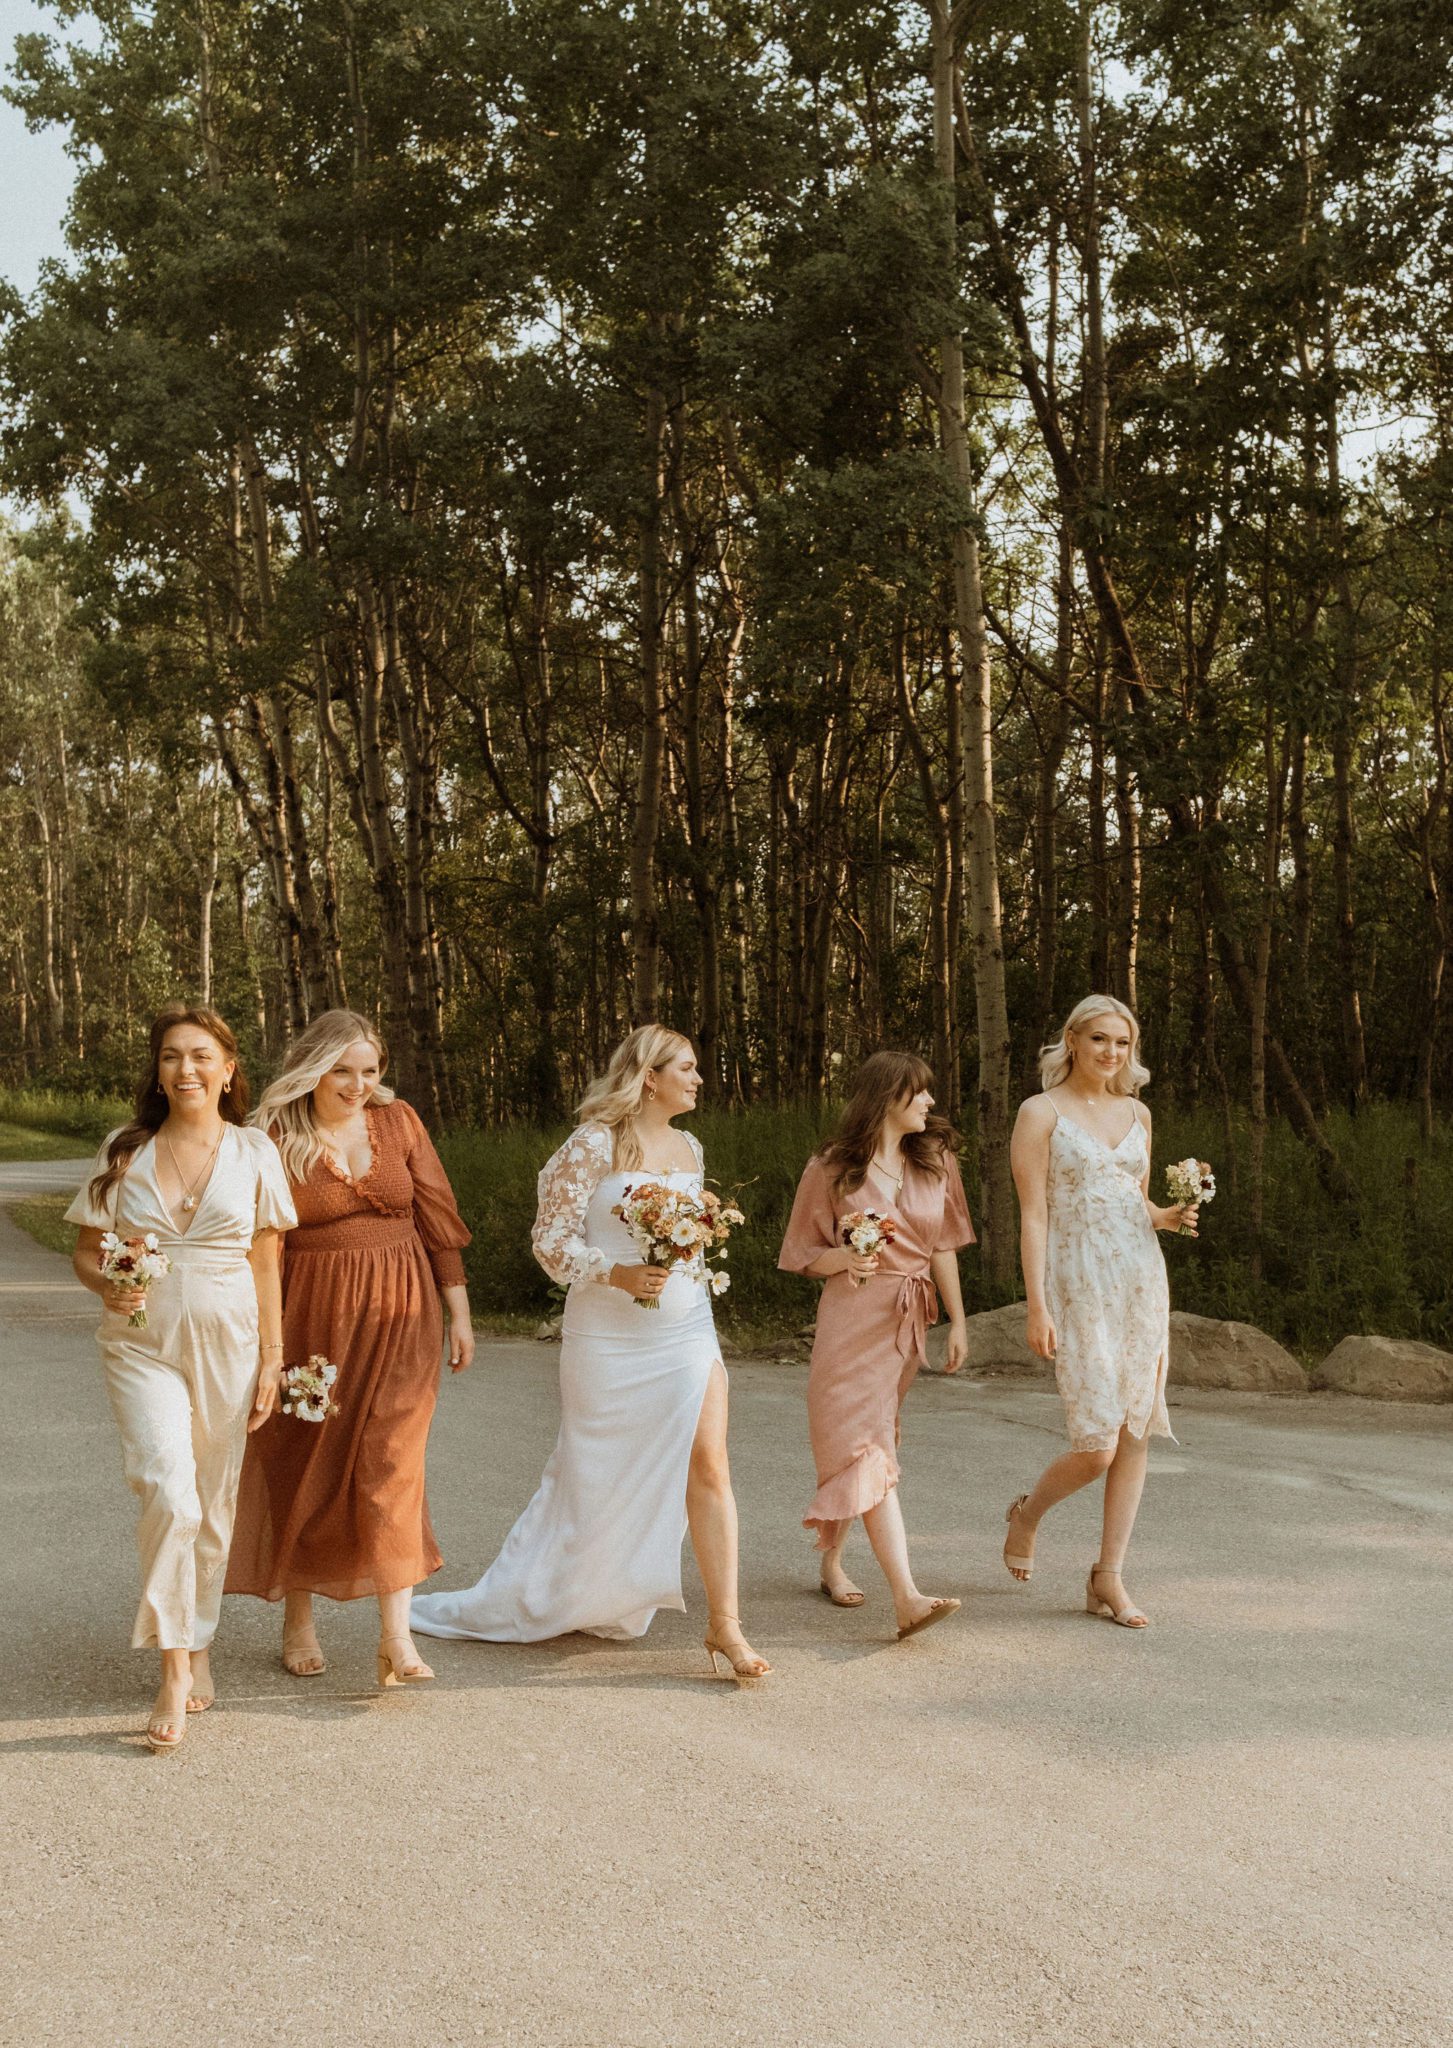 Bridal party outfit ideas, cottage core bridal party looks, peach and dusty pink wedding inspiration